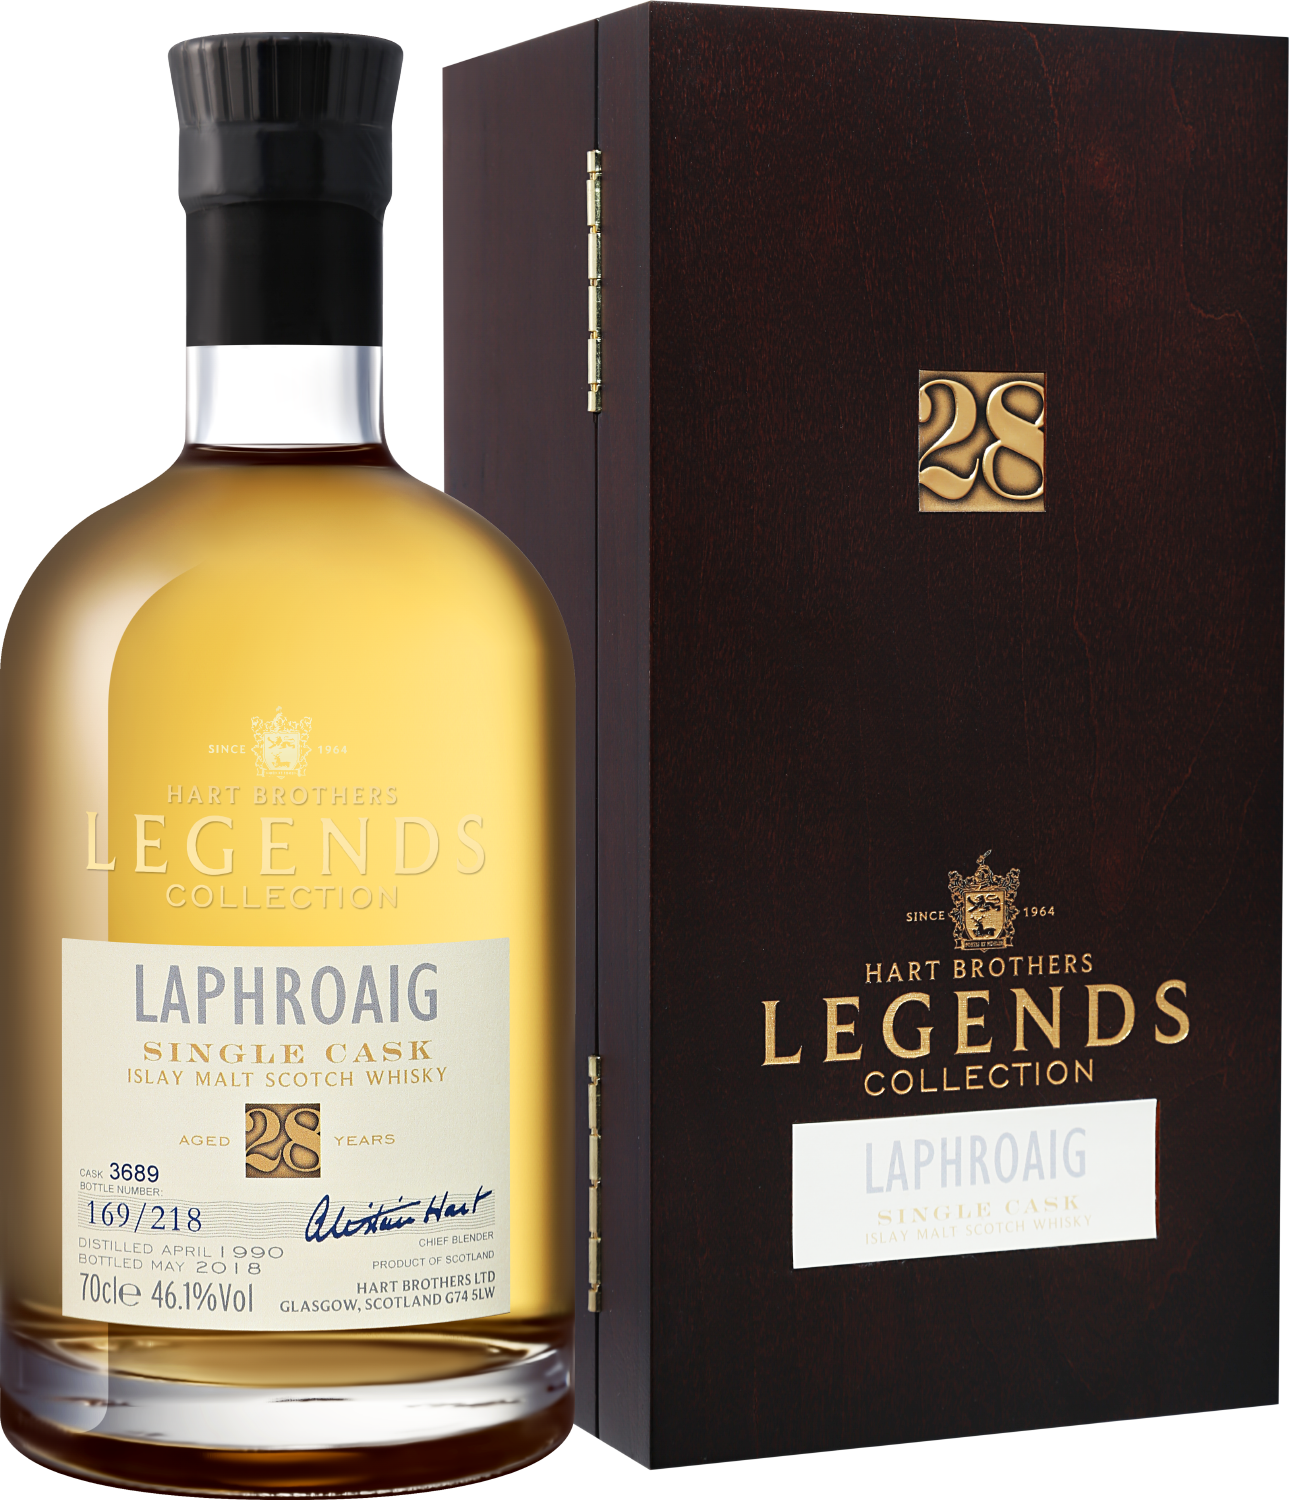 Hart Brothers Legends Collection Laphroaig Islay Single Cask Malt Scotch Whisky 28 y.o. (gift box)